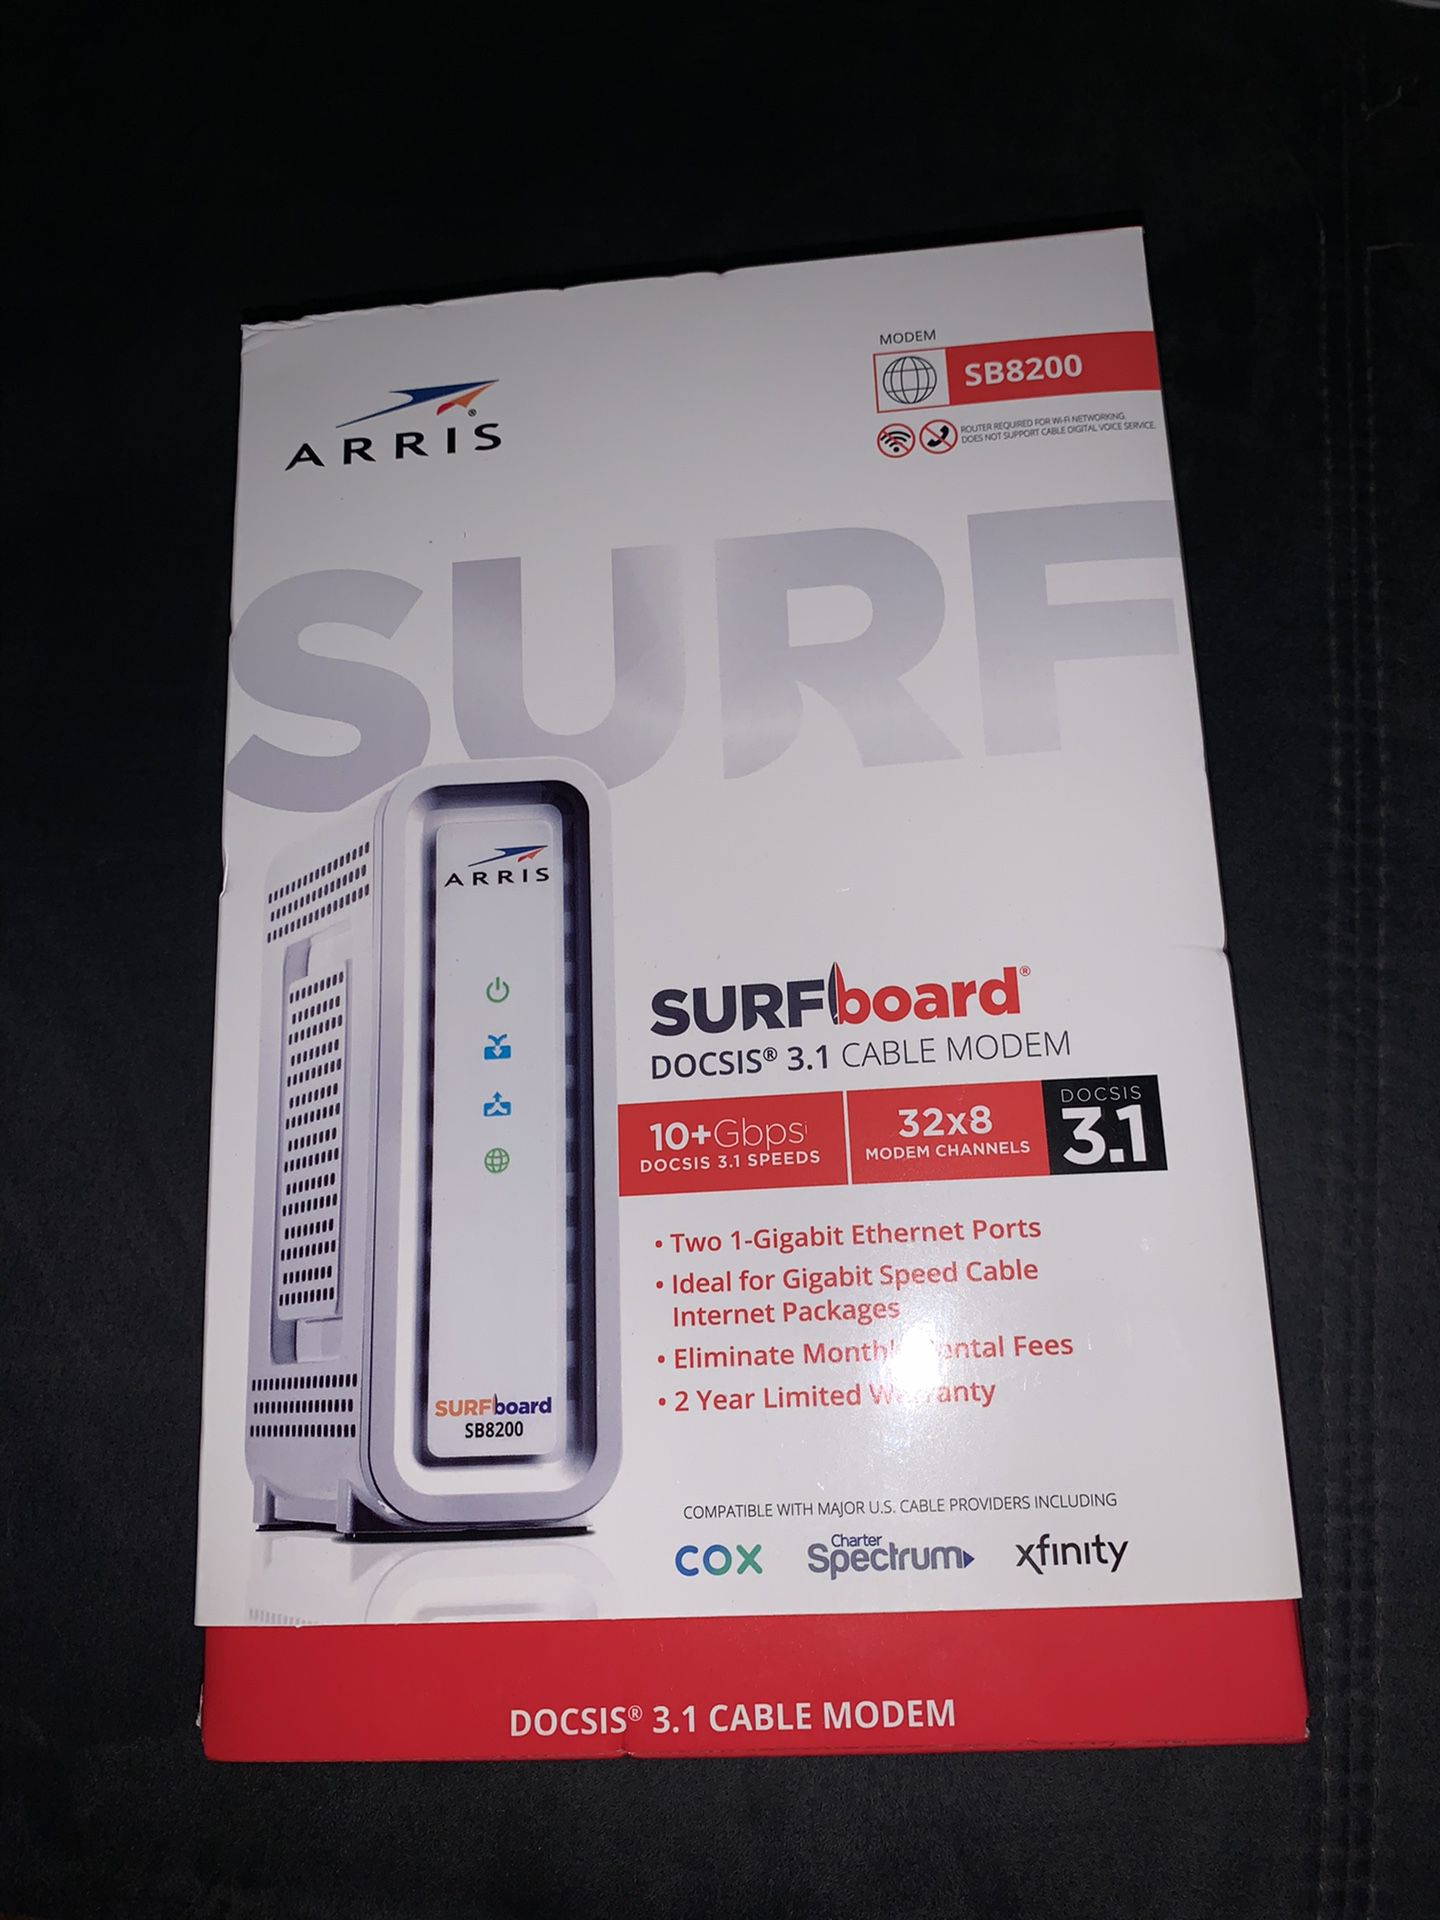 Arris cable modem surfboard docsis 3.1 brand new